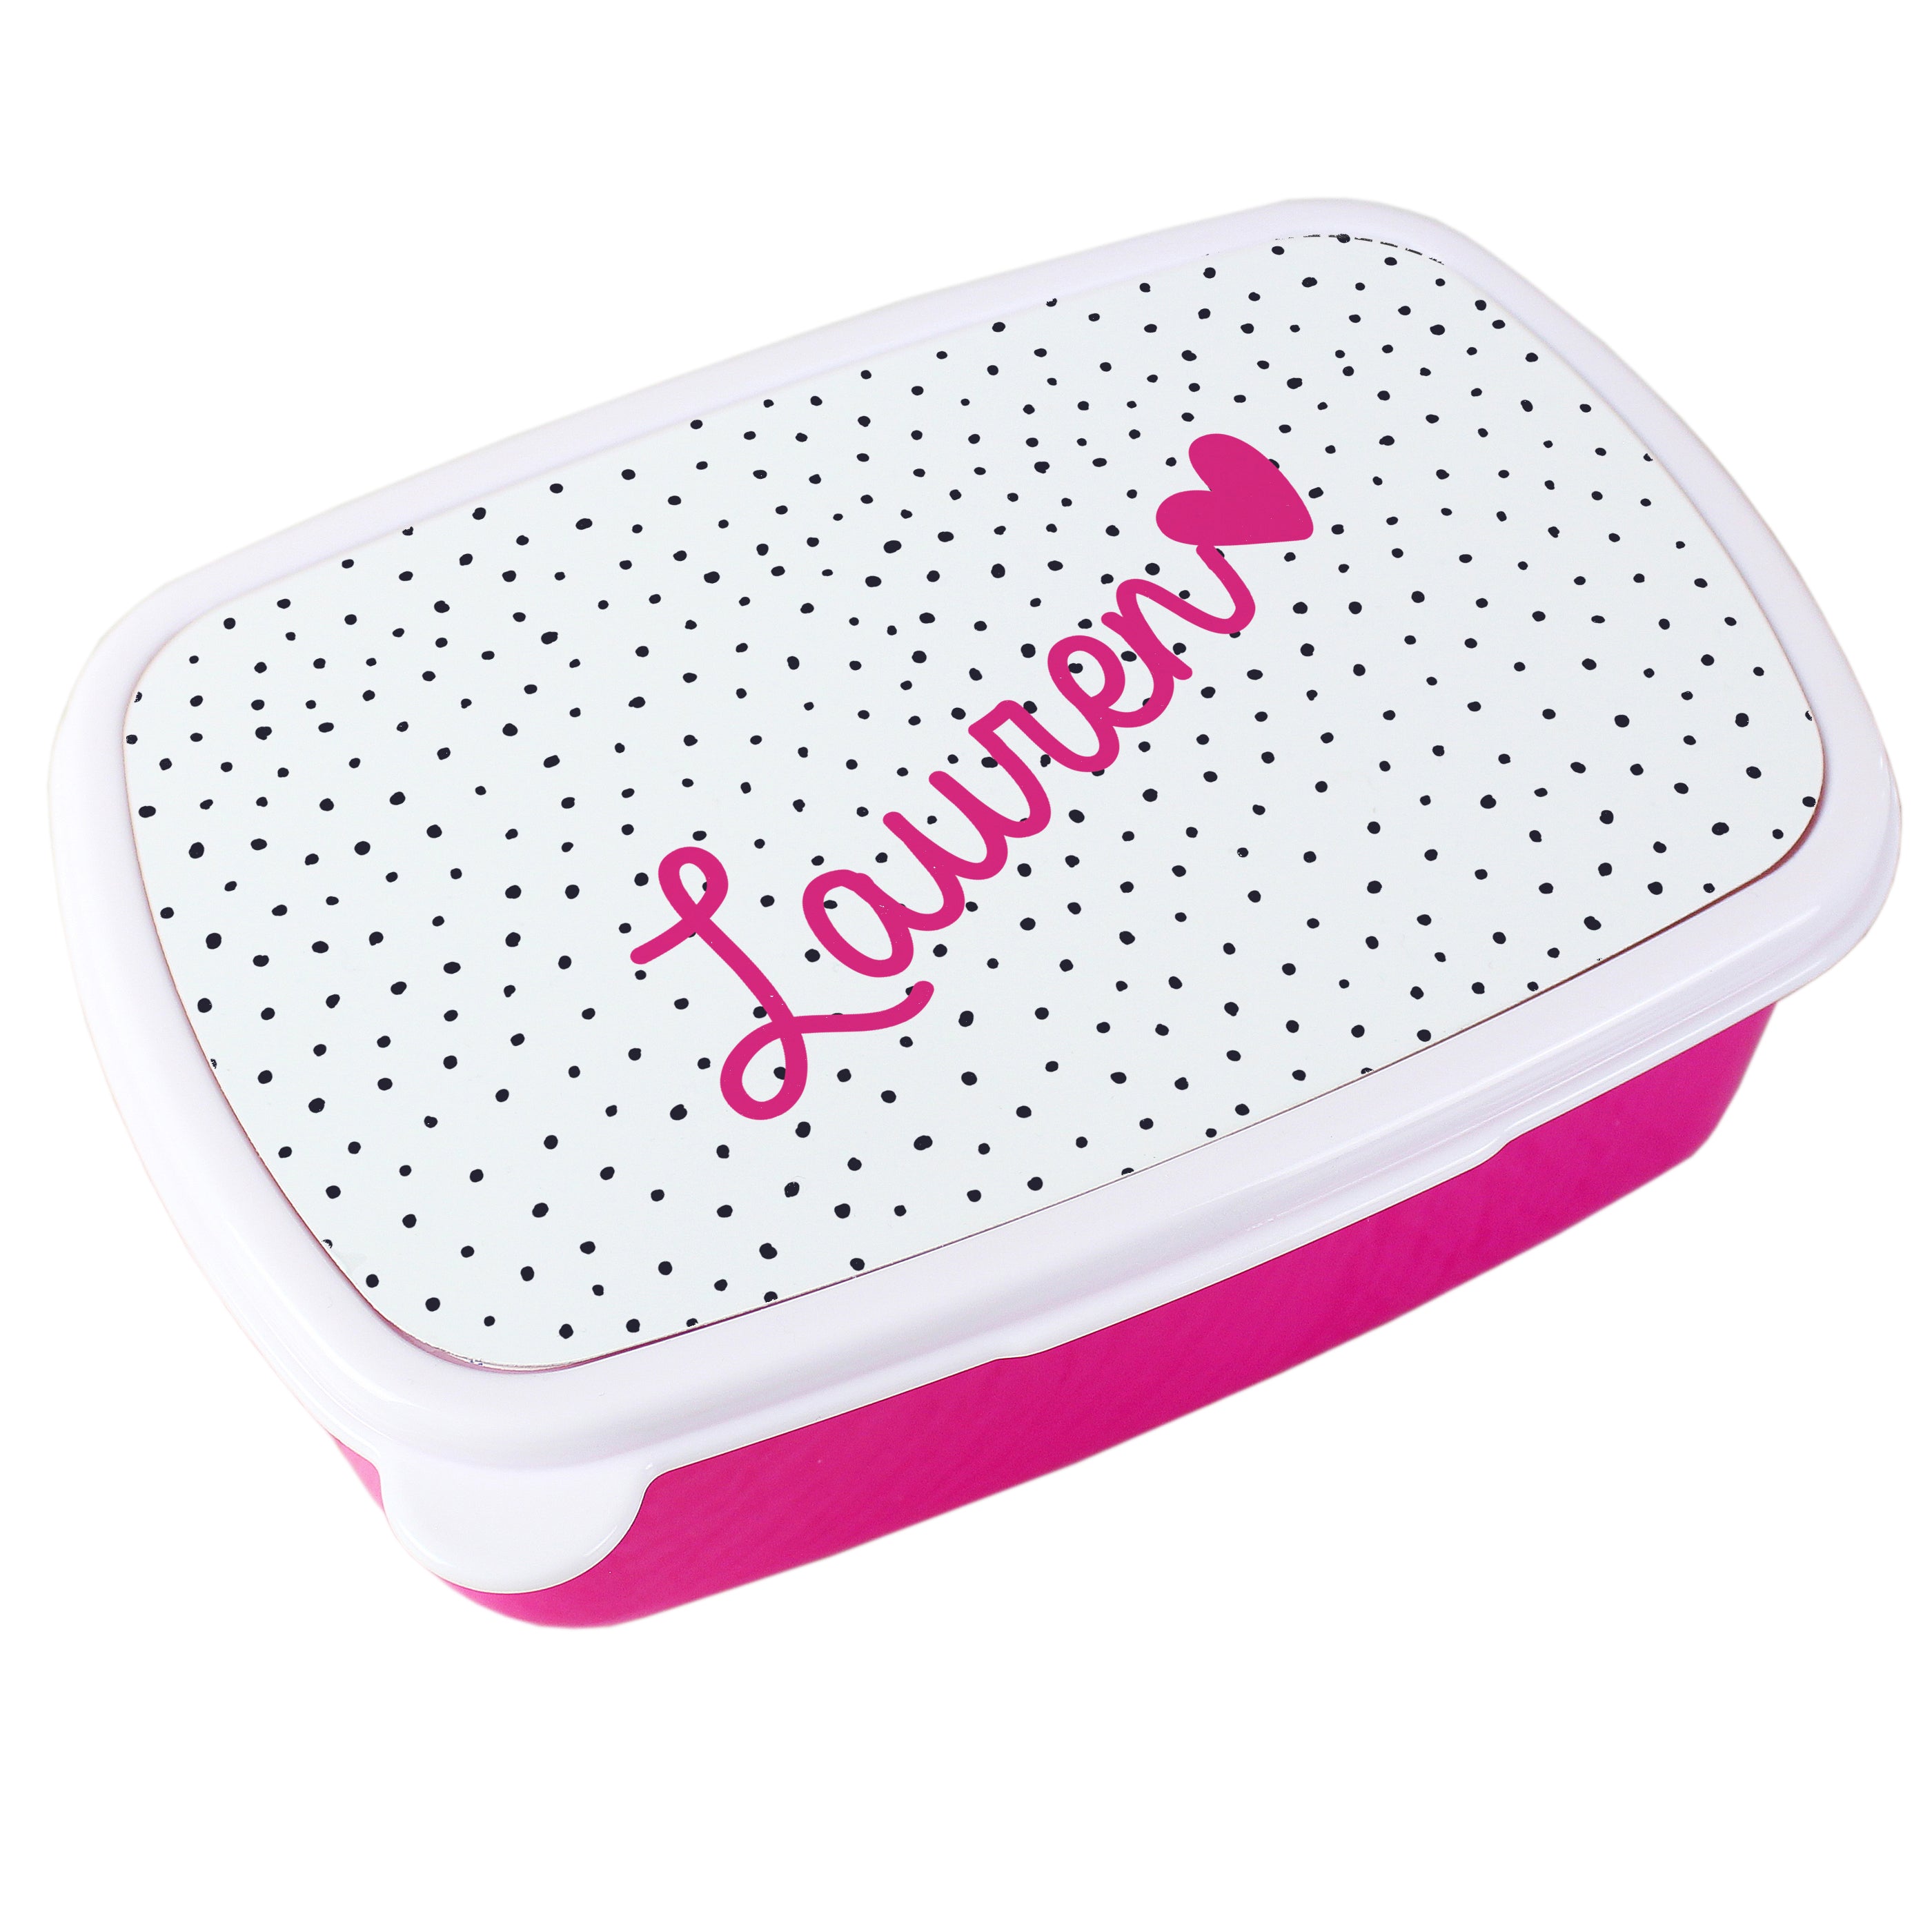 Personalised Pink Heart Lunch Box